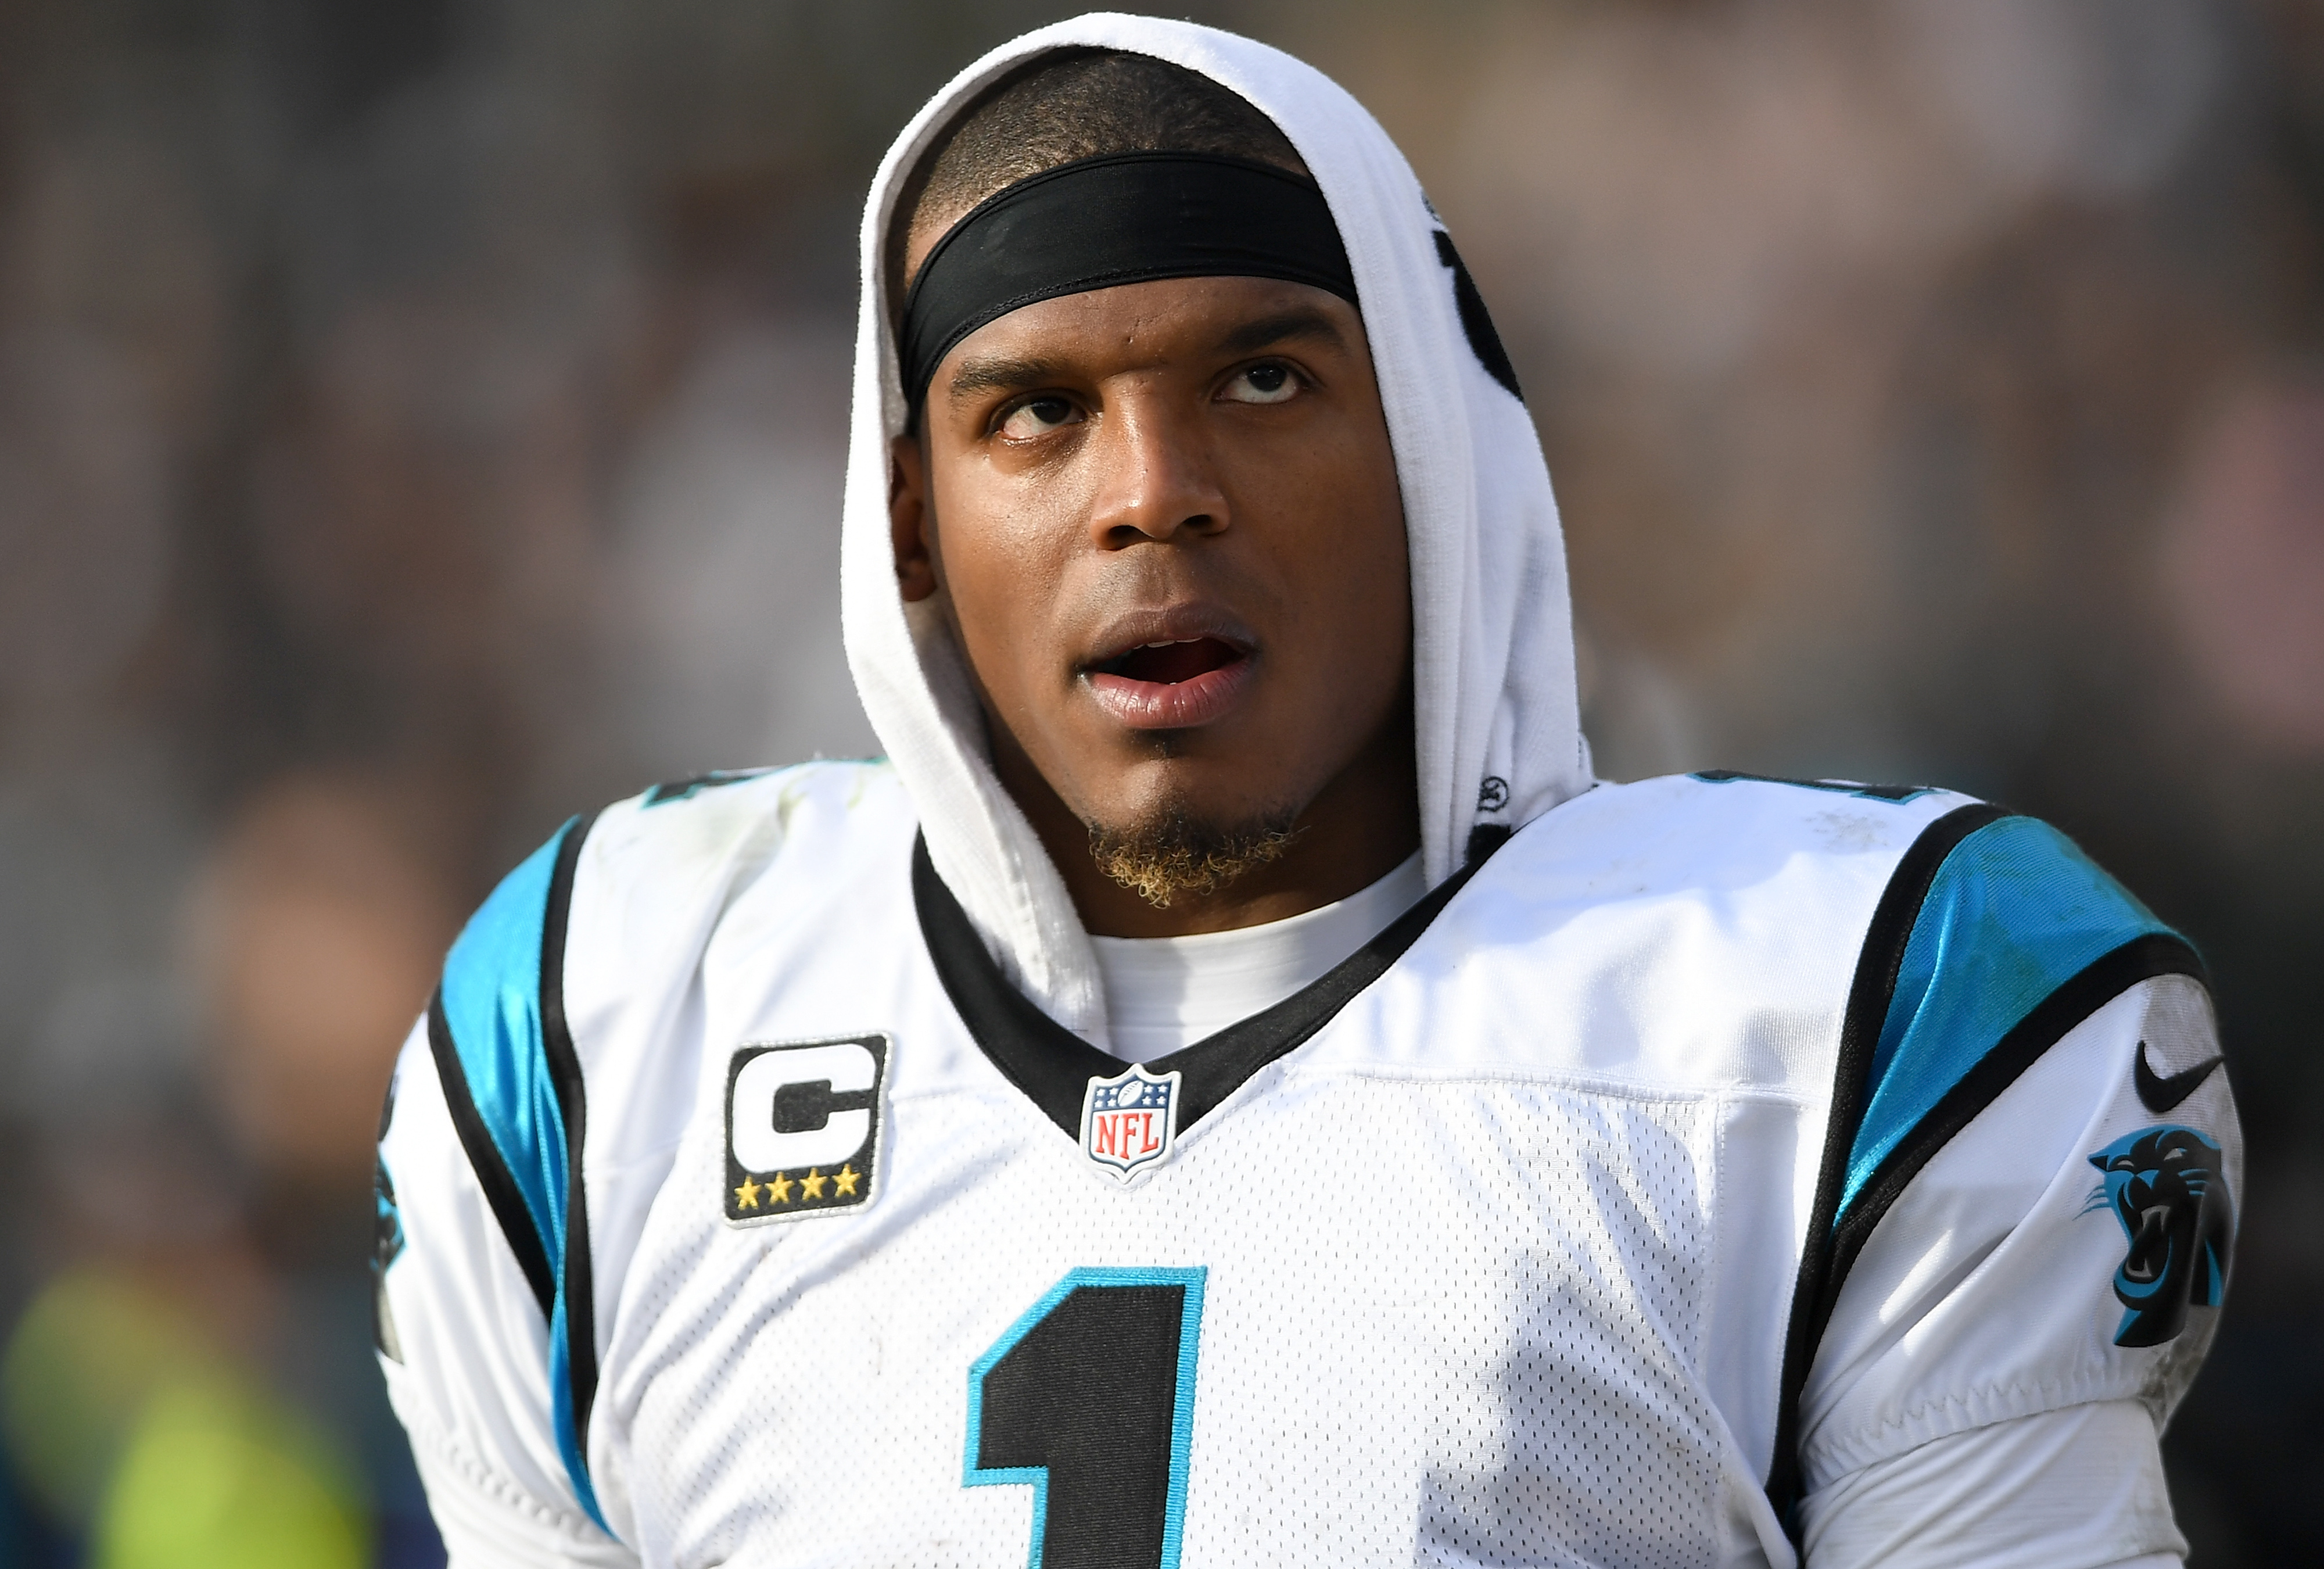 NFL Star Cam Newton Just Lost a Big Sponsorship Over Sexist Comments